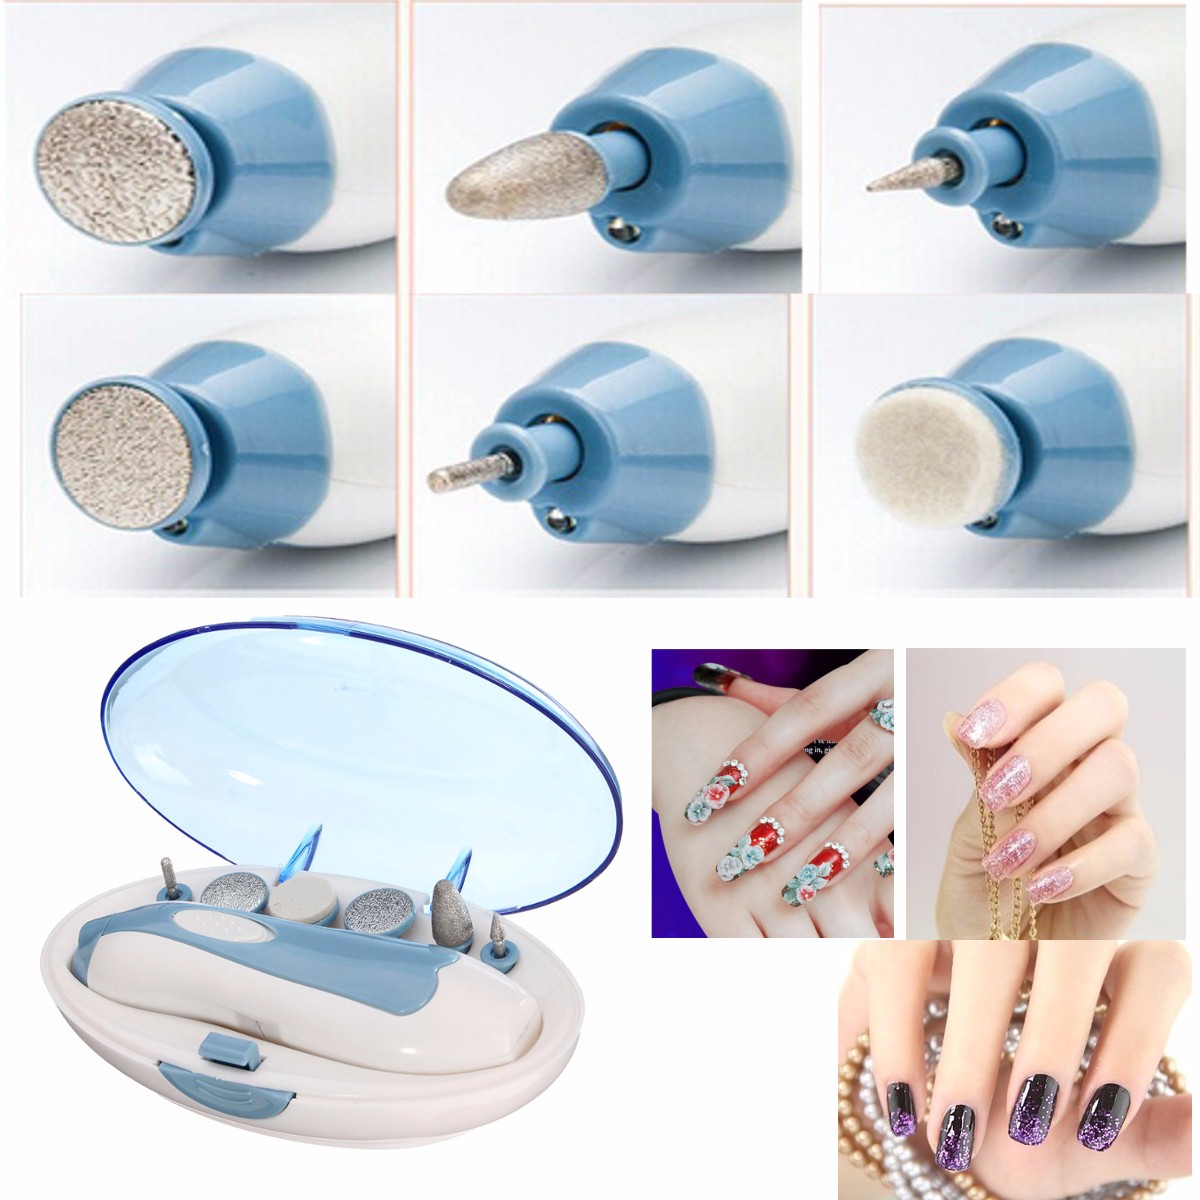 Electric-Nail-File-Drill-Kit-Manicure-Grooming-Multi-function-Pedicure-Machine-1639495-4